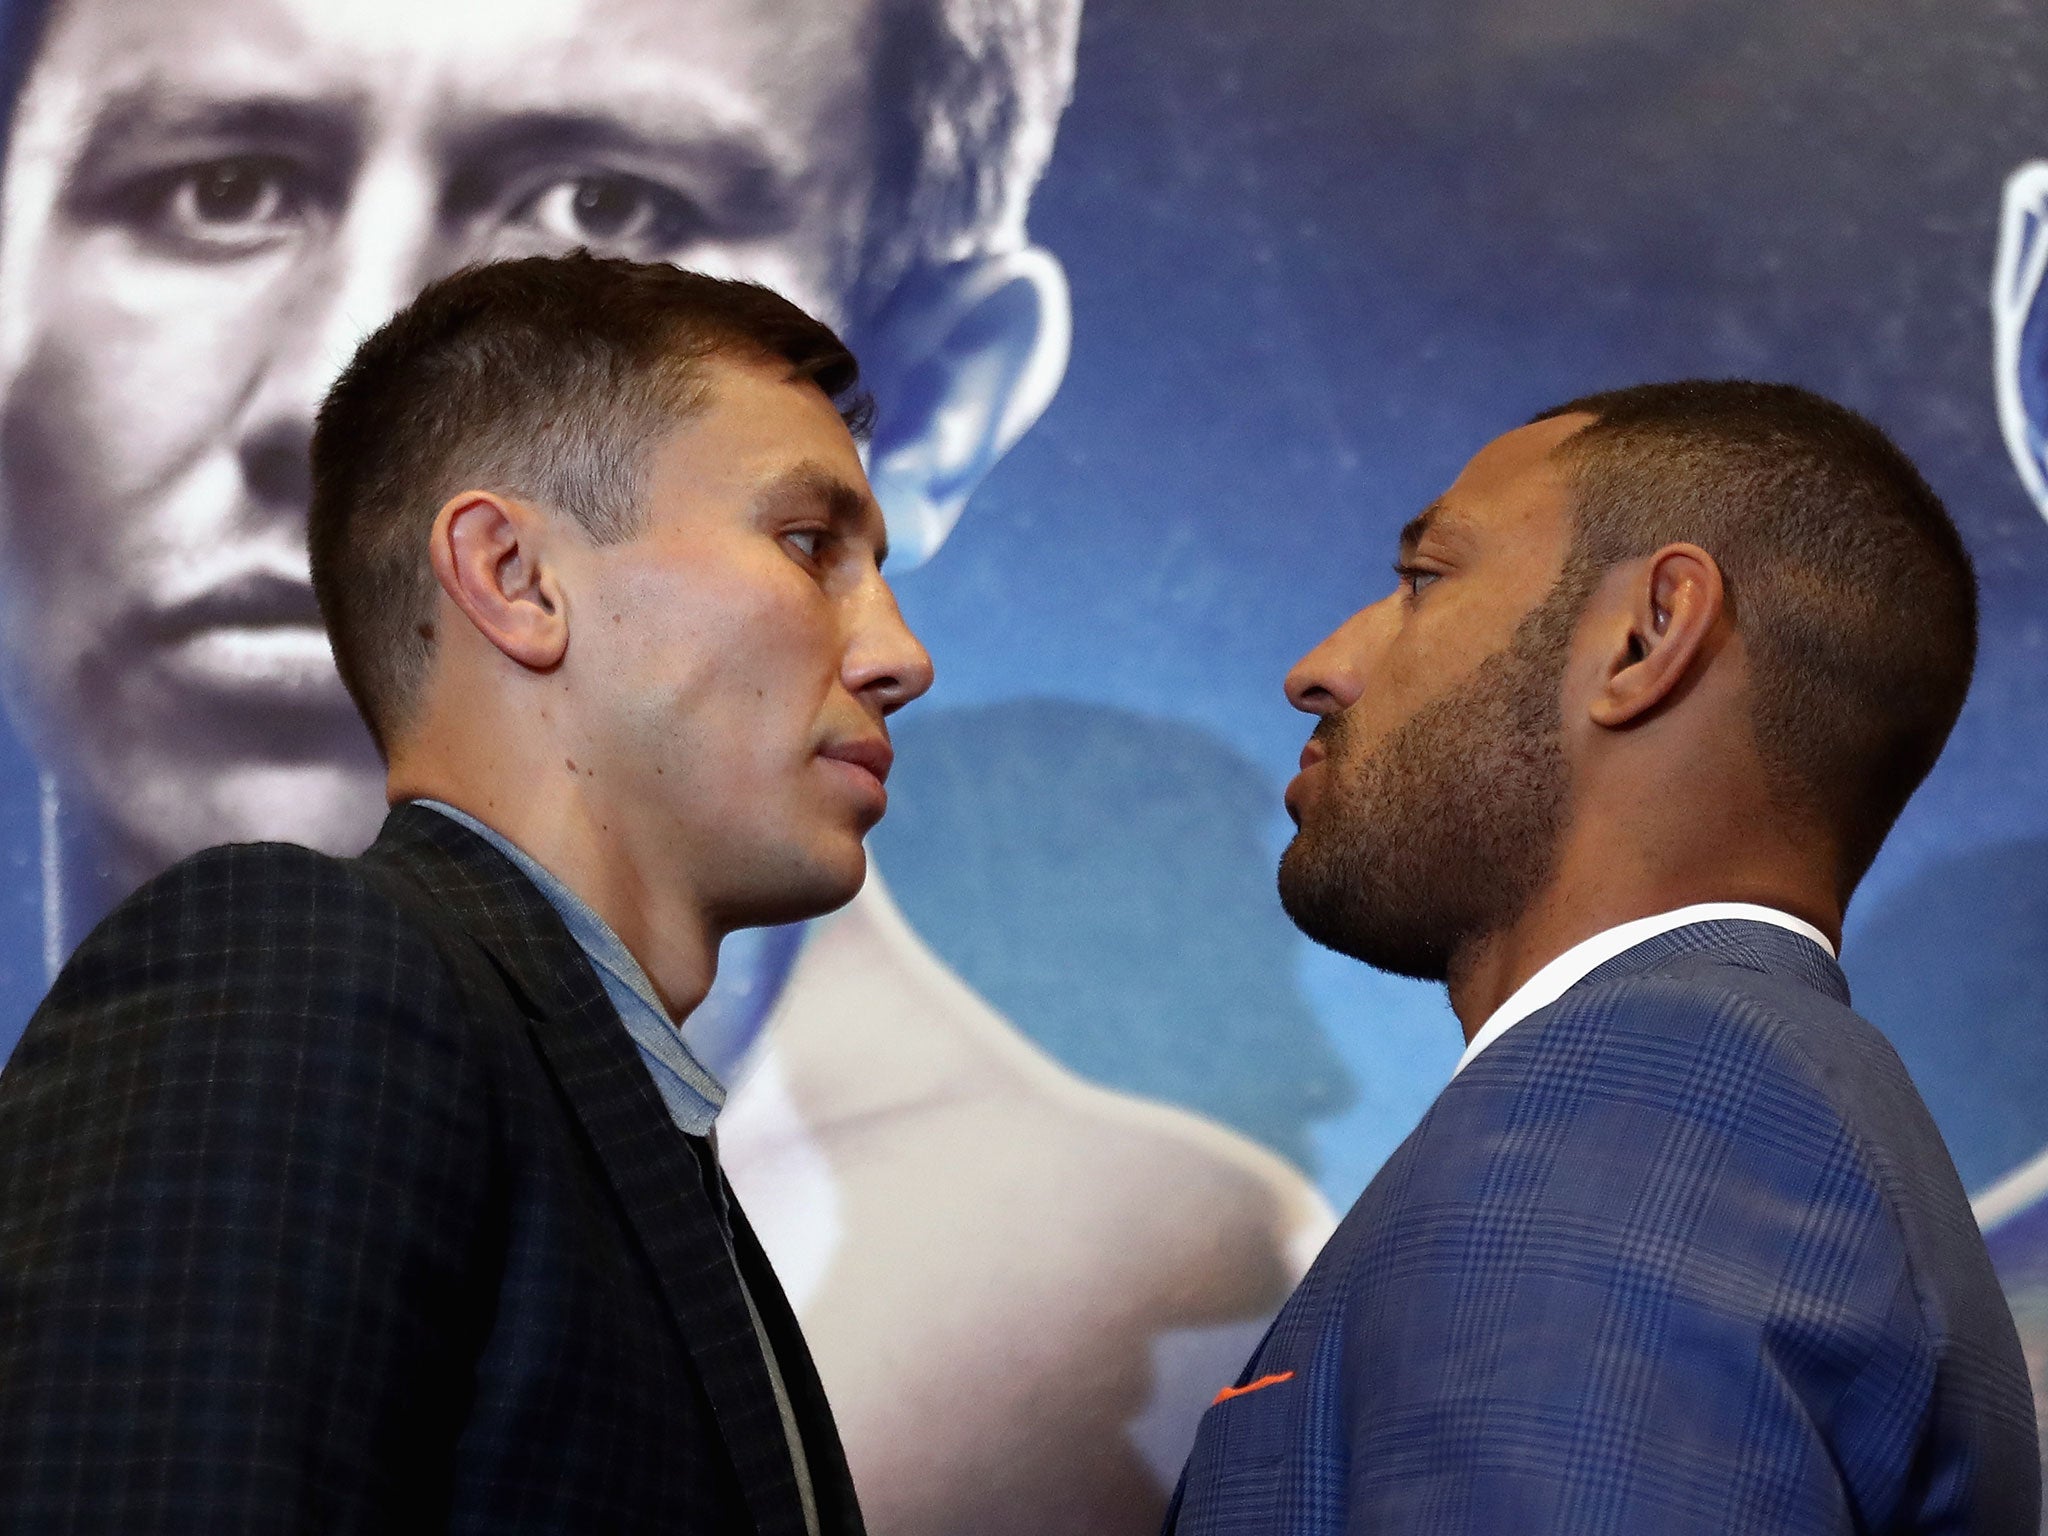 Gennady Golovkin and Kell Brook ahead of Saturday night’s middleweight world title fight